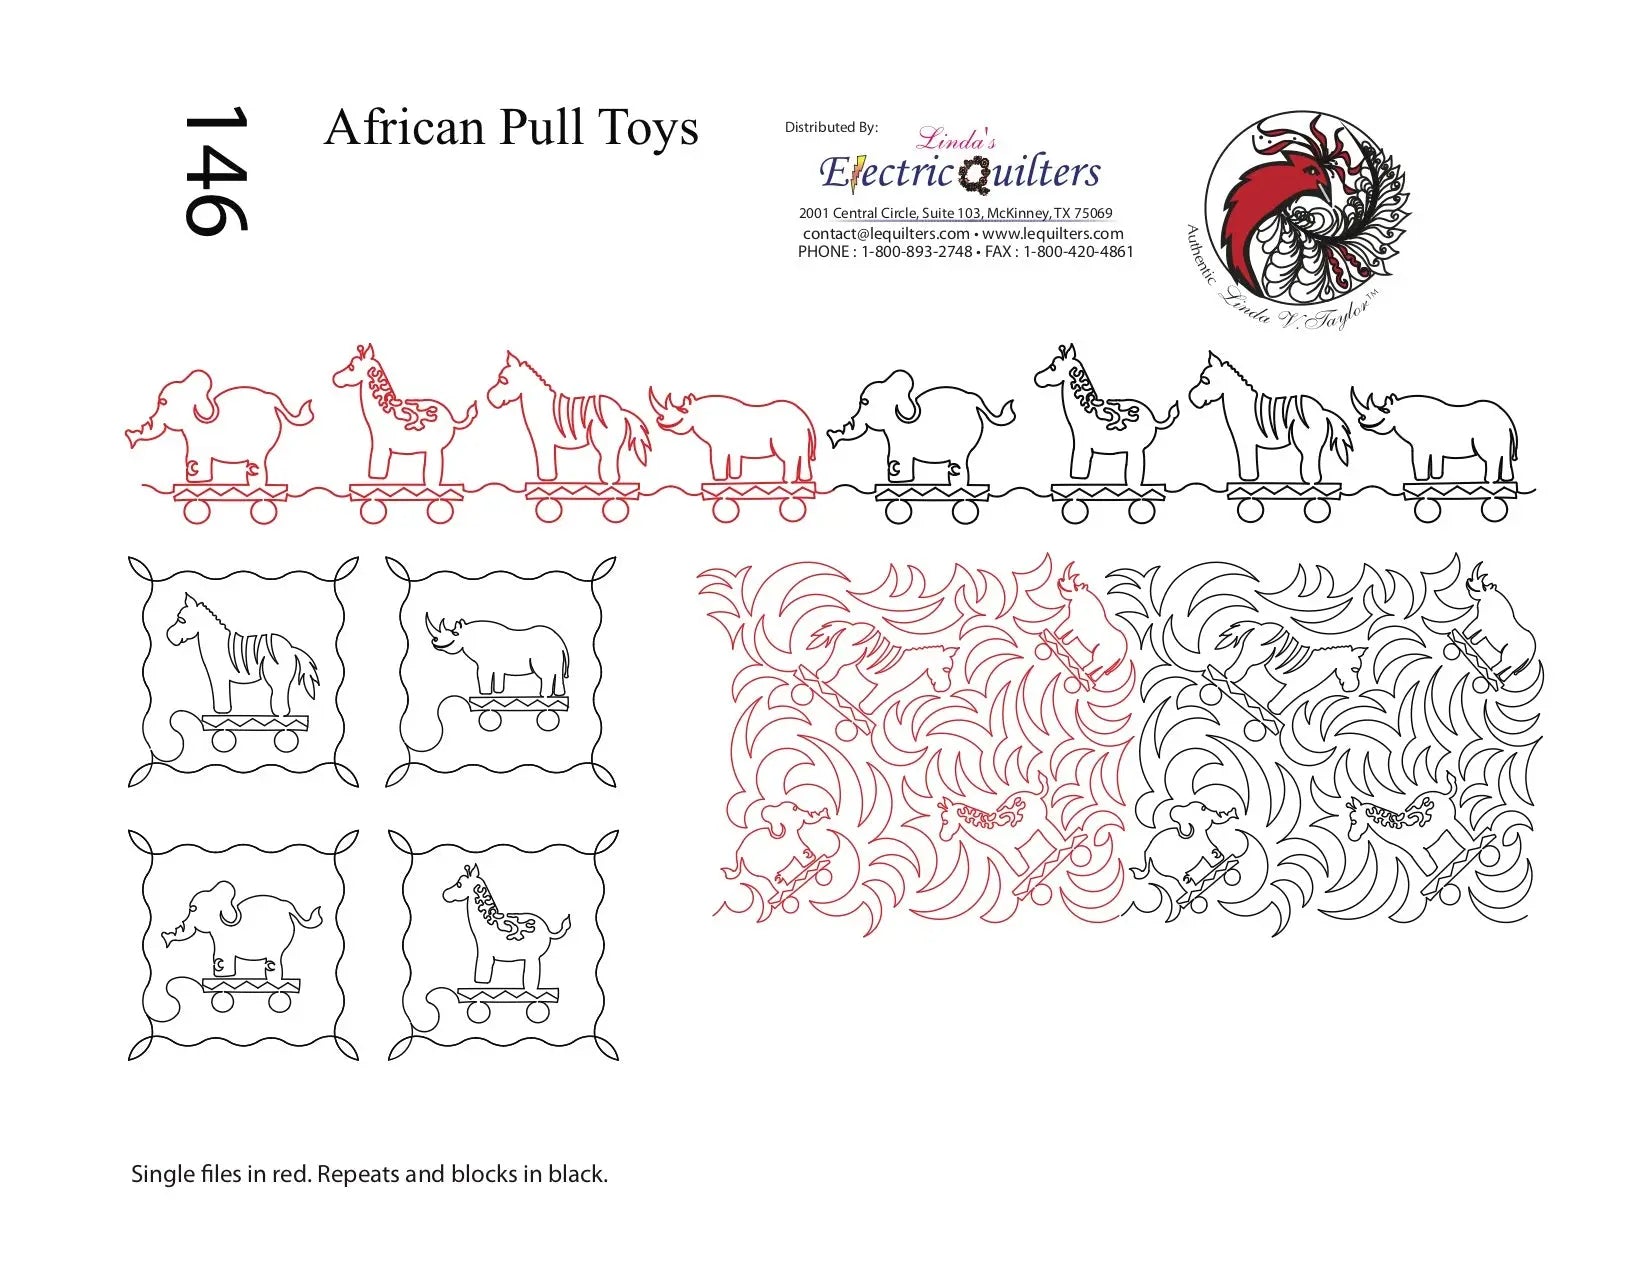 146 African Pull Toys Pantograph with Blocks by Linda V. Taylor - Linda's Electric Quilters